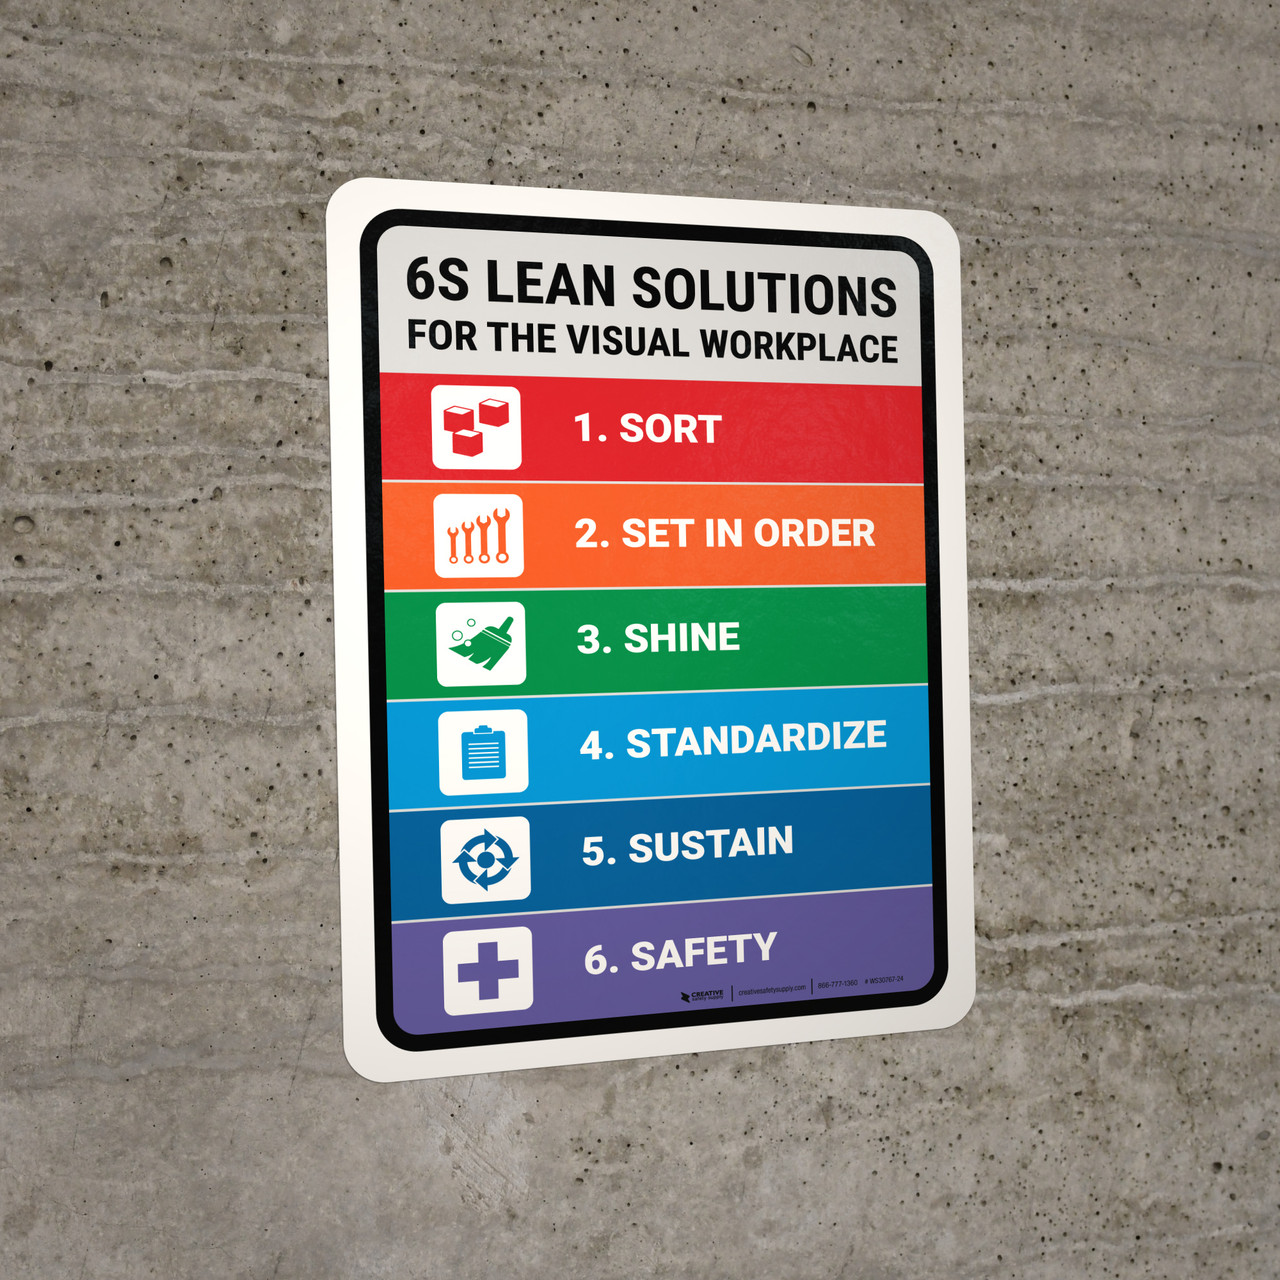 Paint To Go Solid Marker - Visual Workplace, Inc.